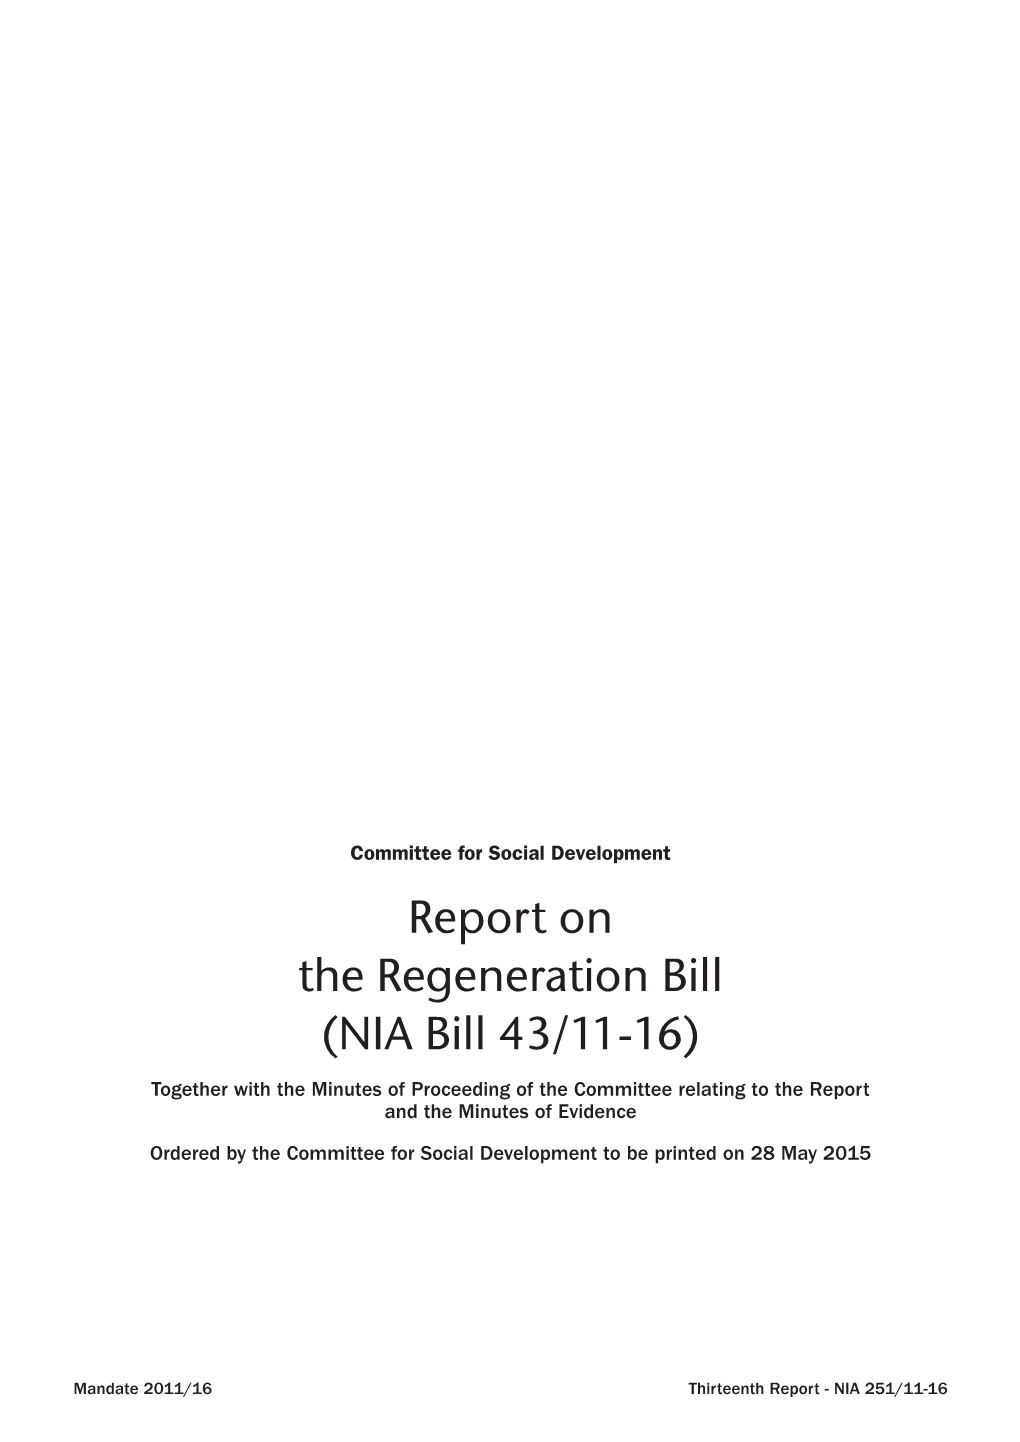 Report on the Regeneration Bill (NIA Bill 43/11-16) Together with the Minutes of Proceeding of the Committee Relating to the Report and the Minutes of Evidence